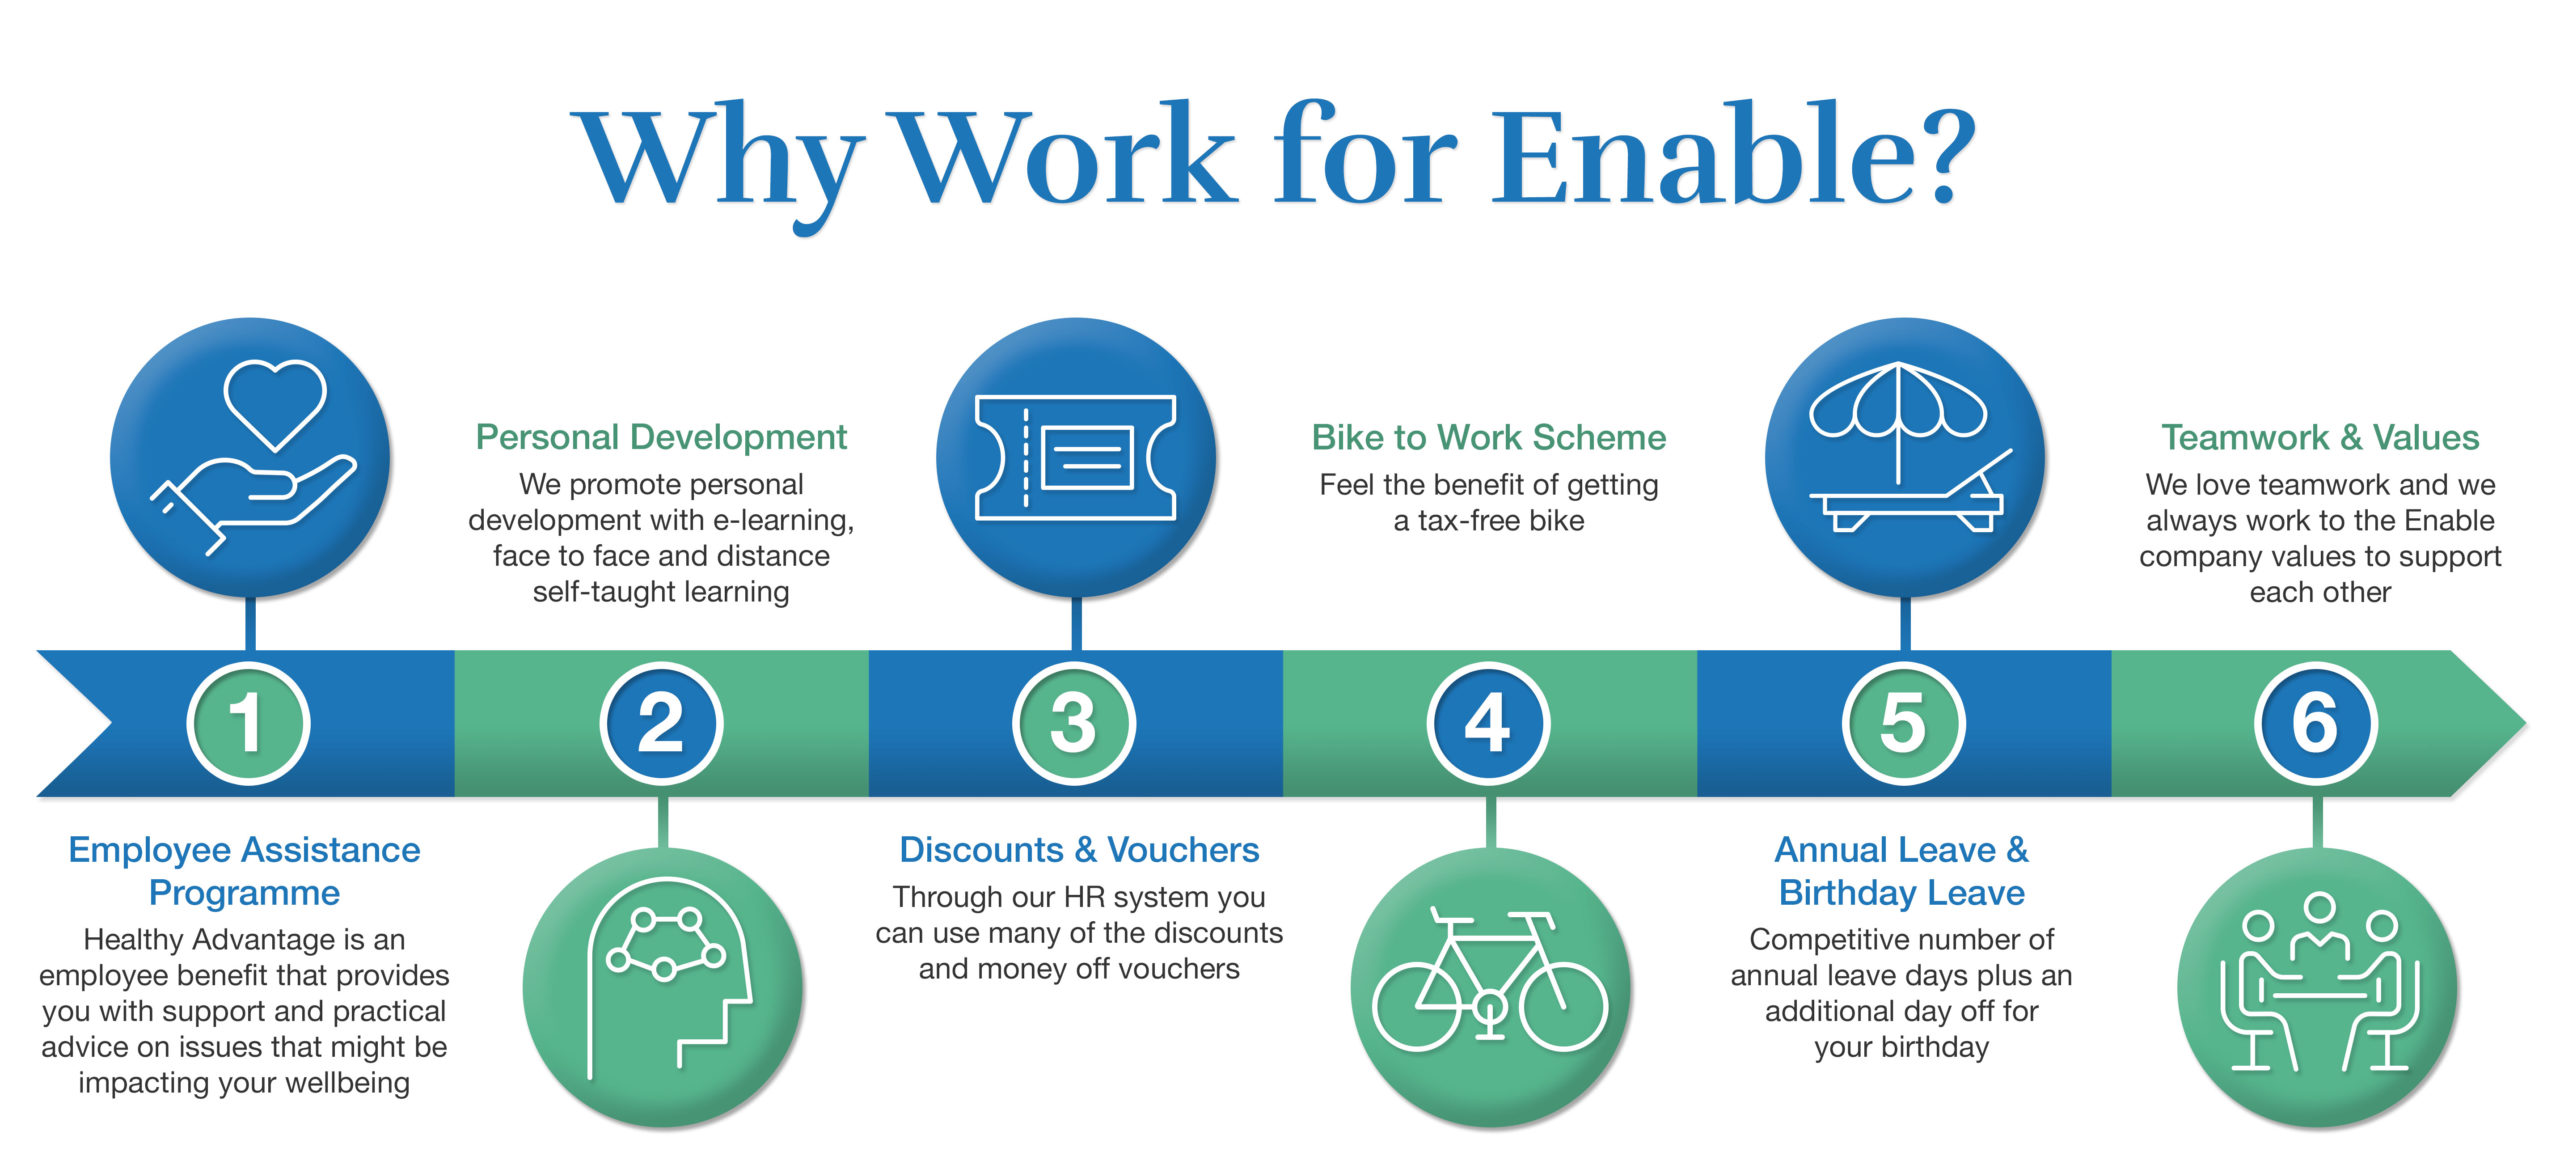 Why Work for Enable?